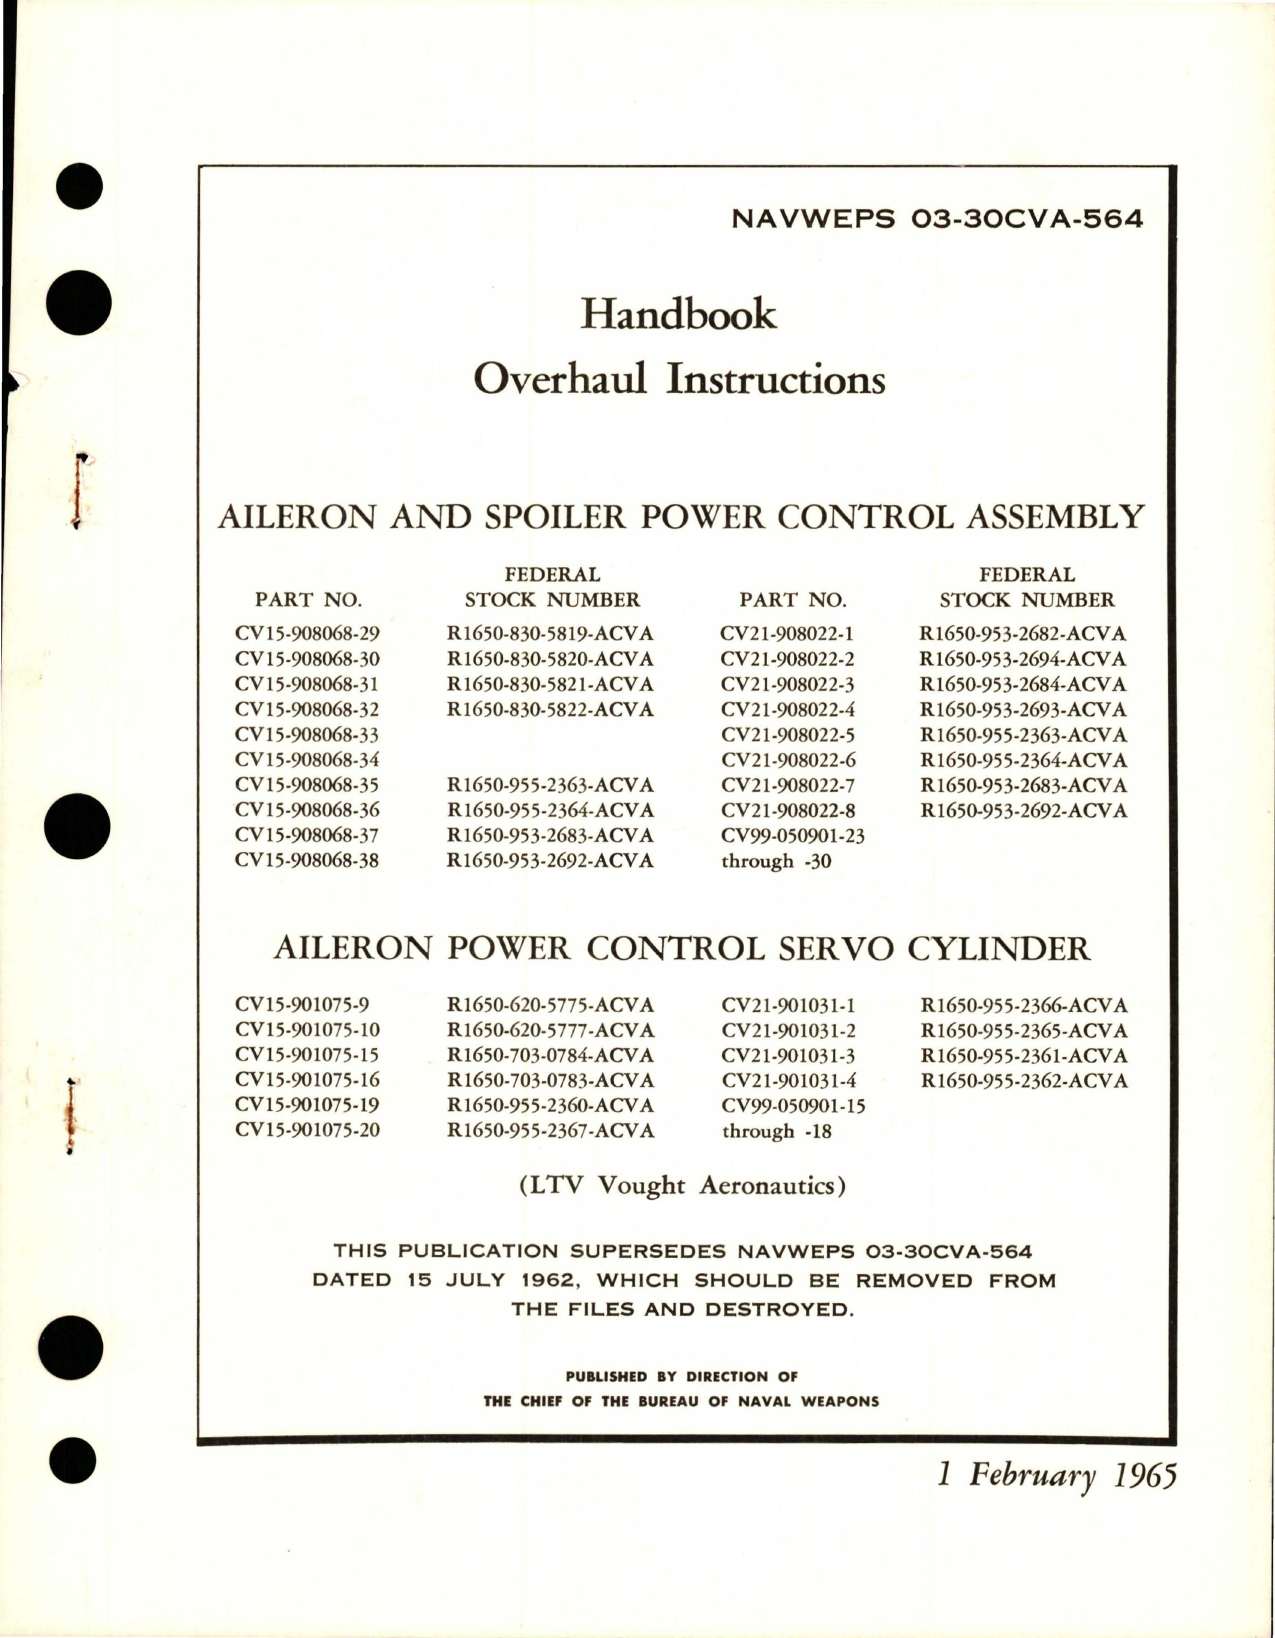 Sample page 1 from AirCorps Library document: Overhaul Instructions for Aileron & Spoiler Power Control Assembly and Servo Cylinder